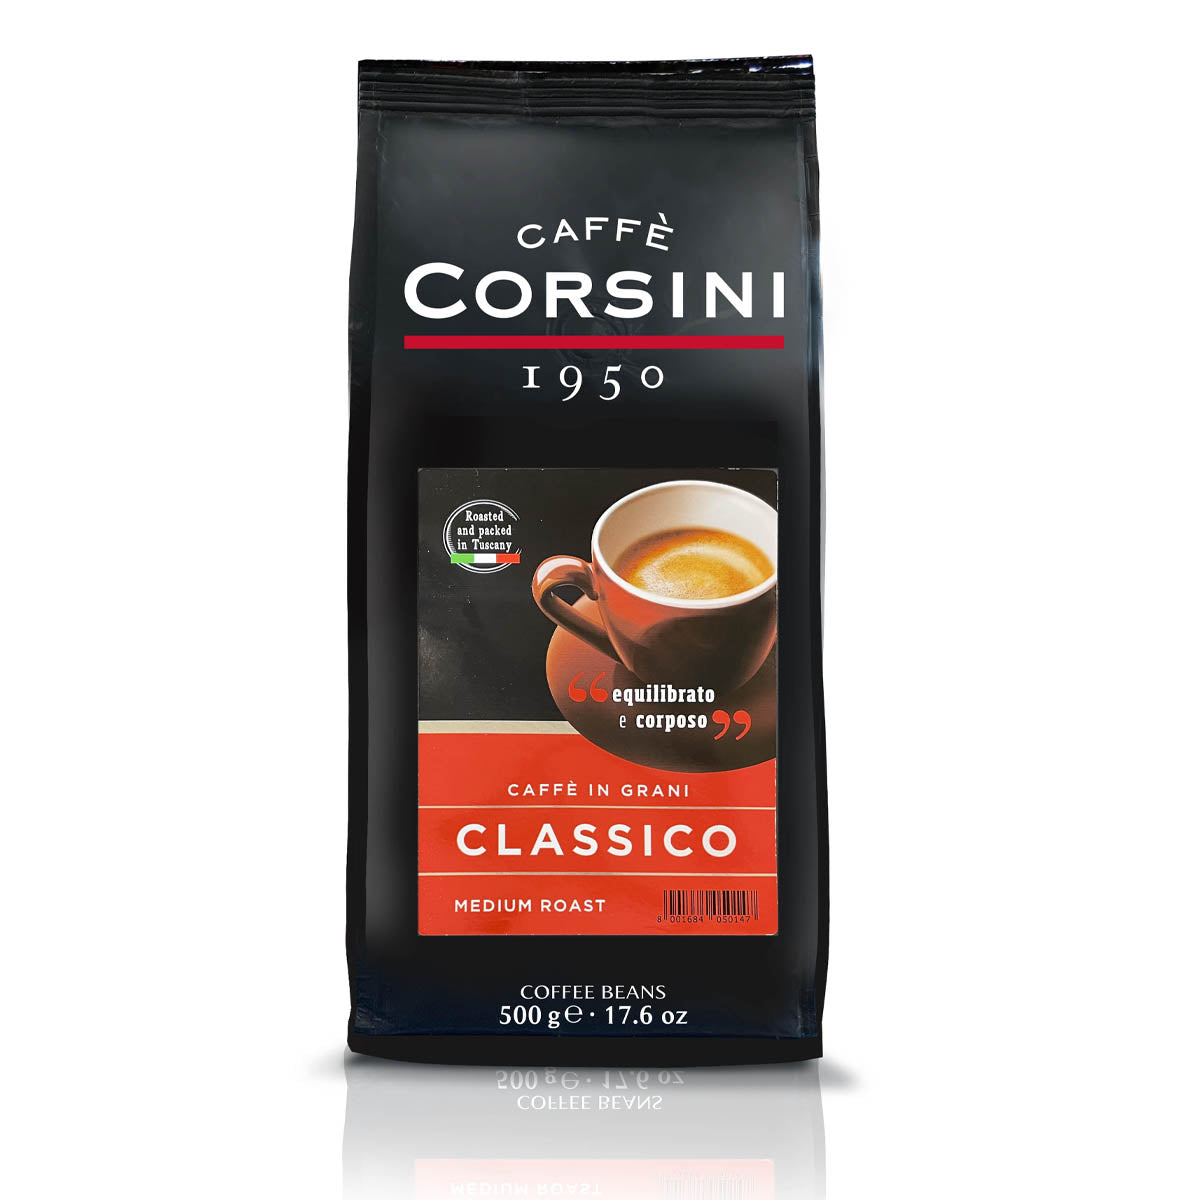 Coffee beans | Classico | 500g | Box of 15 packs